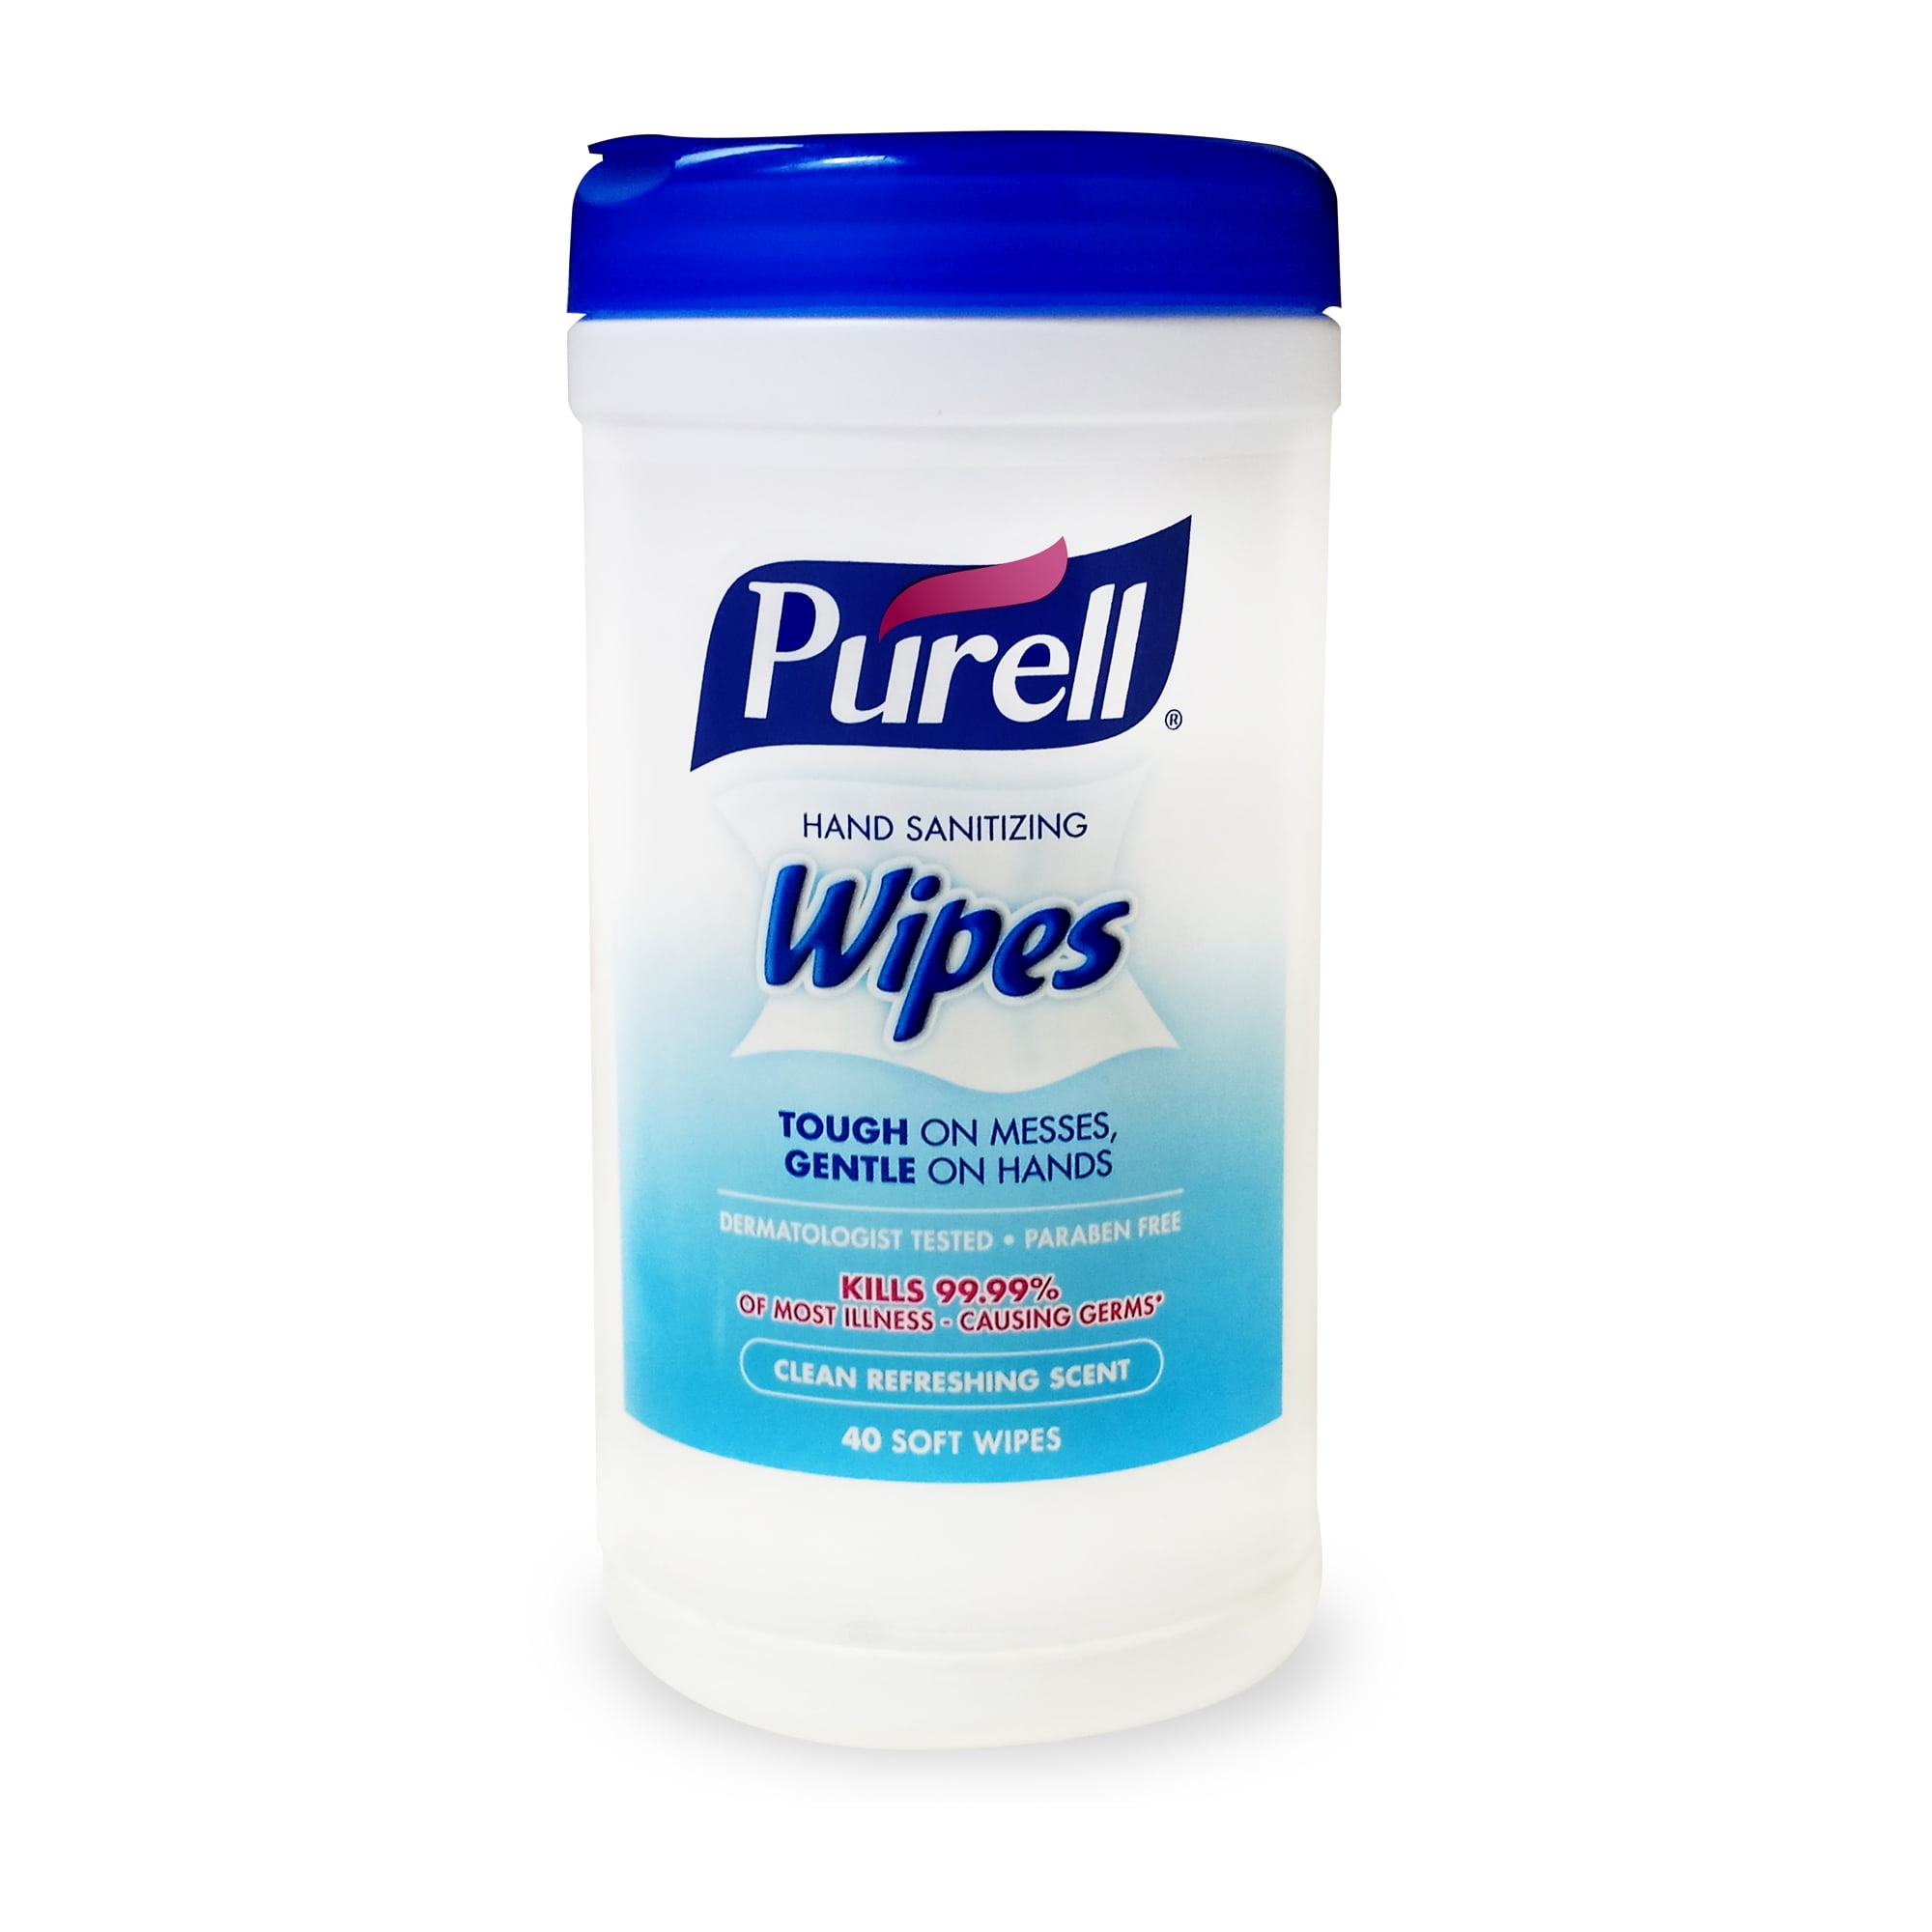 Wipe clean. Sanitizing wipes. . Hand Sanitizer wipes. Sanitizing strength Quiclean. Hand Refresher.